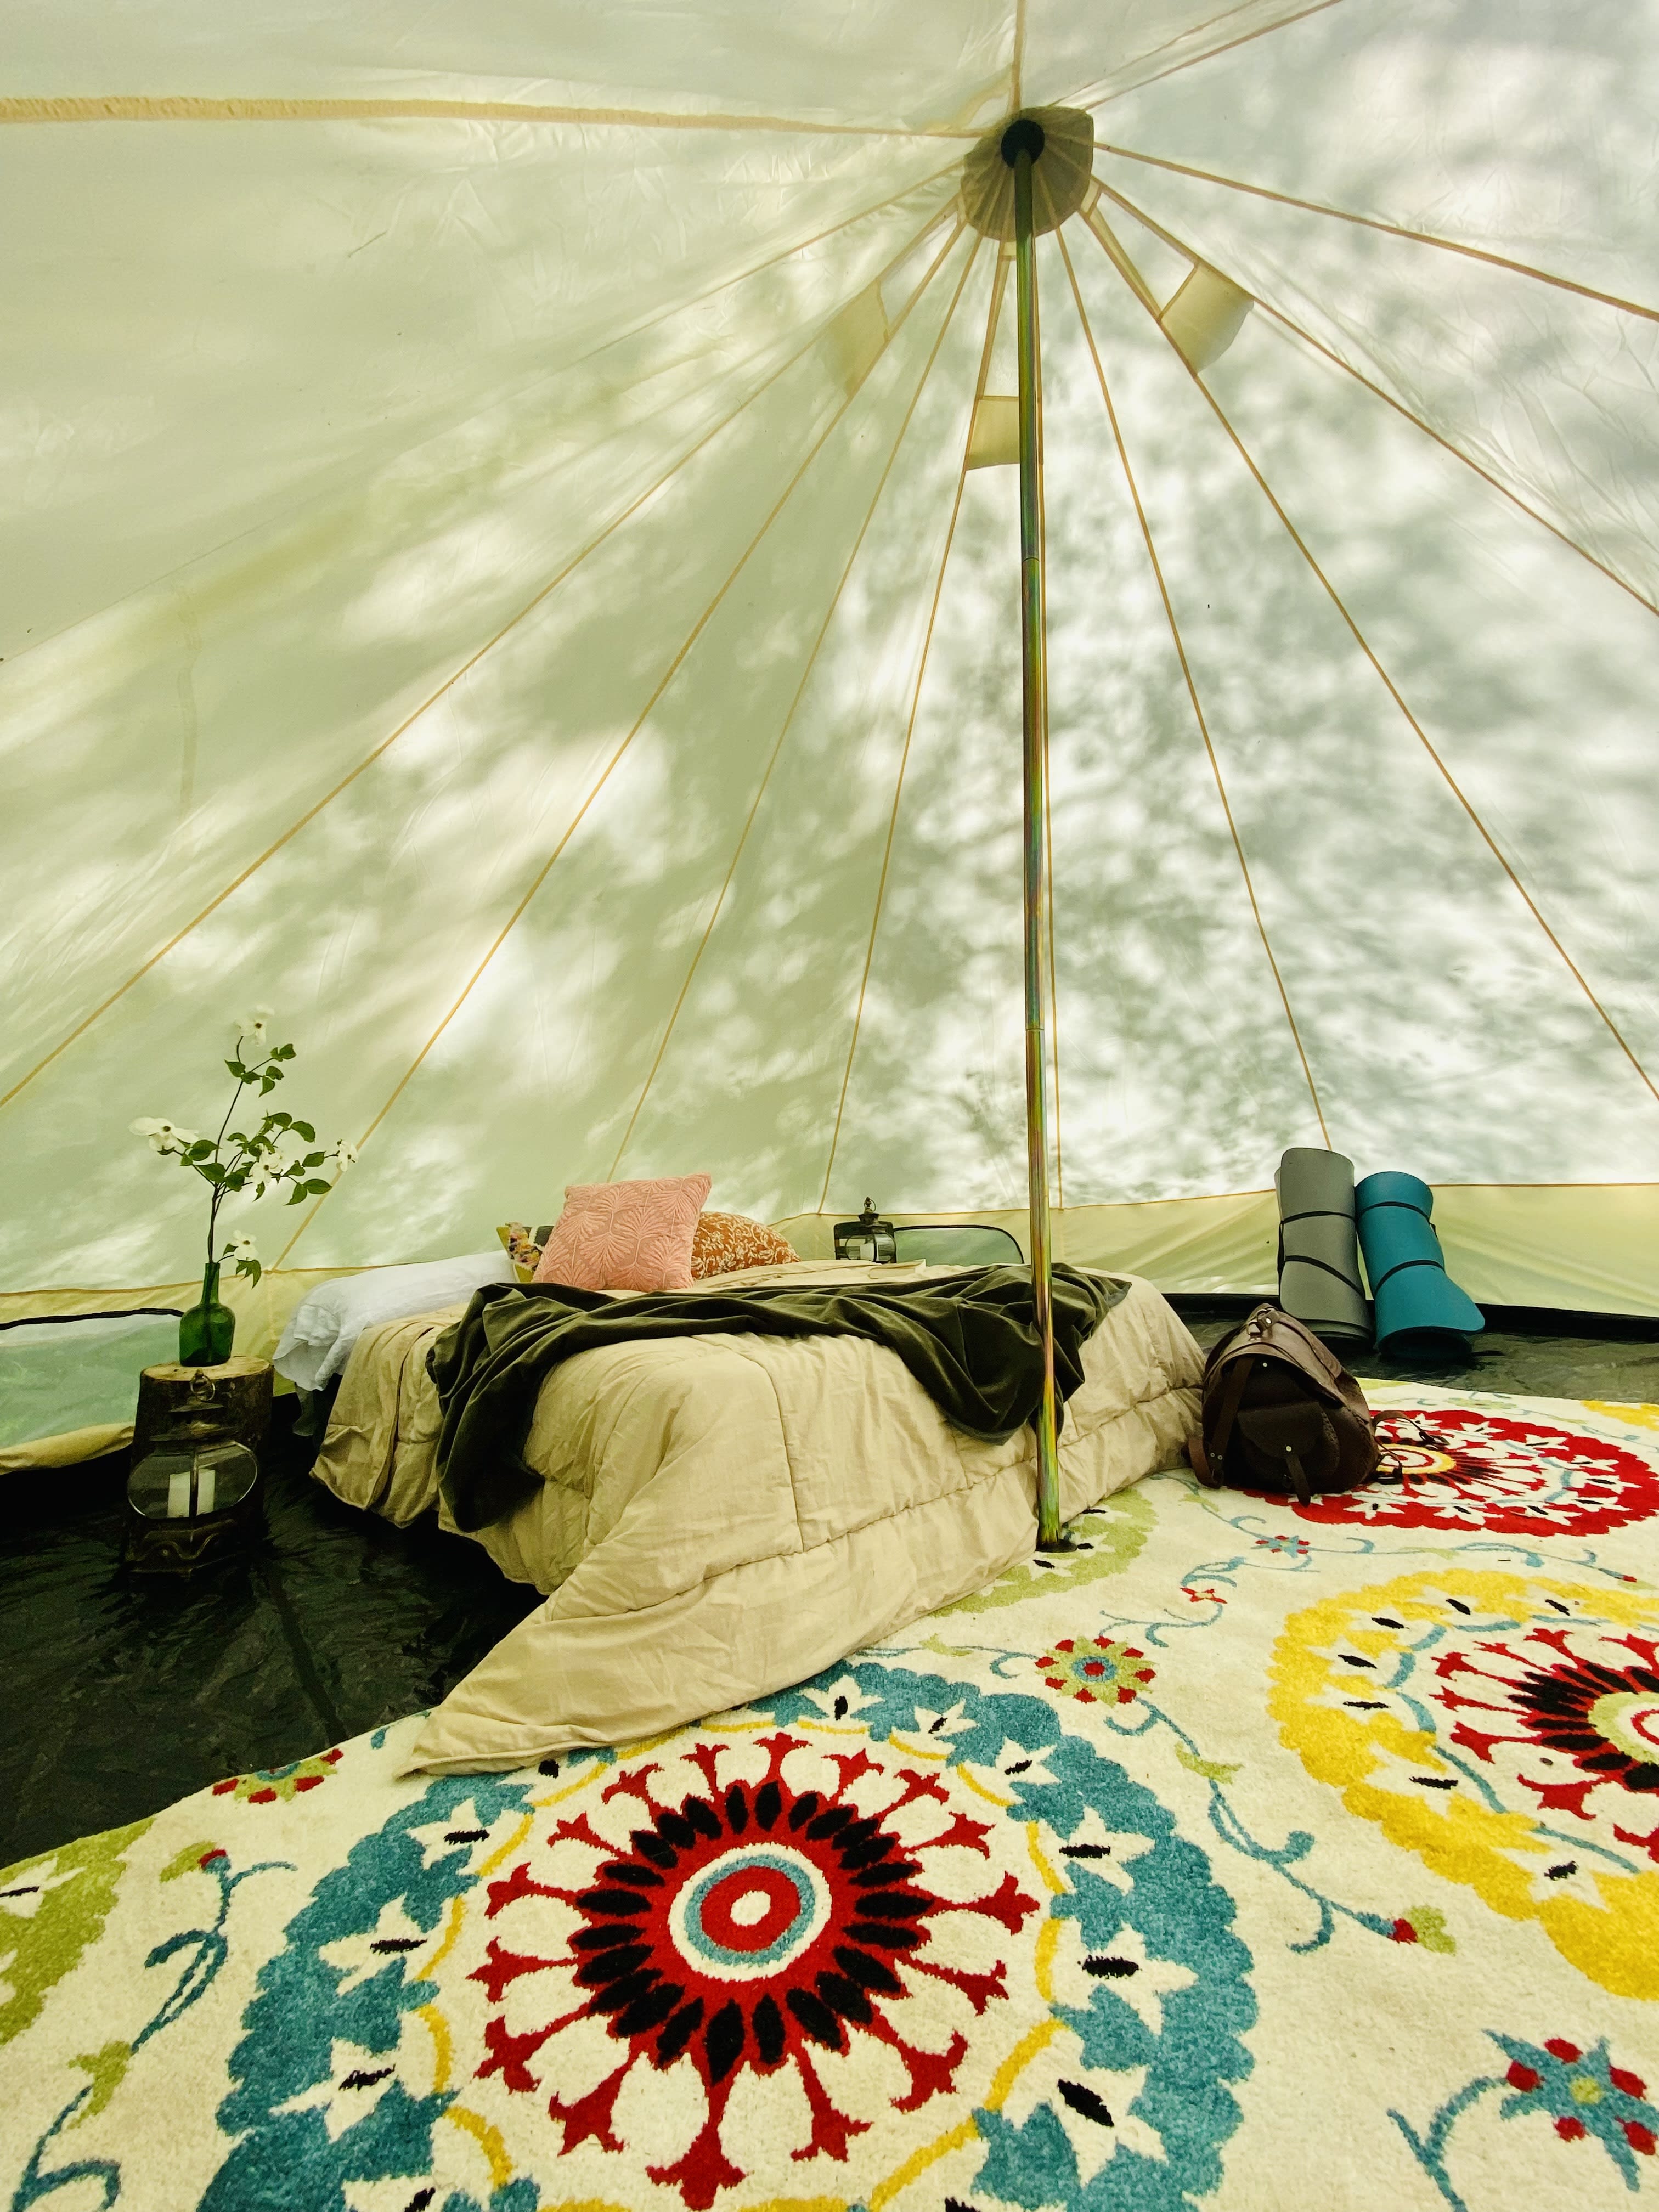 Glamping Tents 93 acre Horse Farm